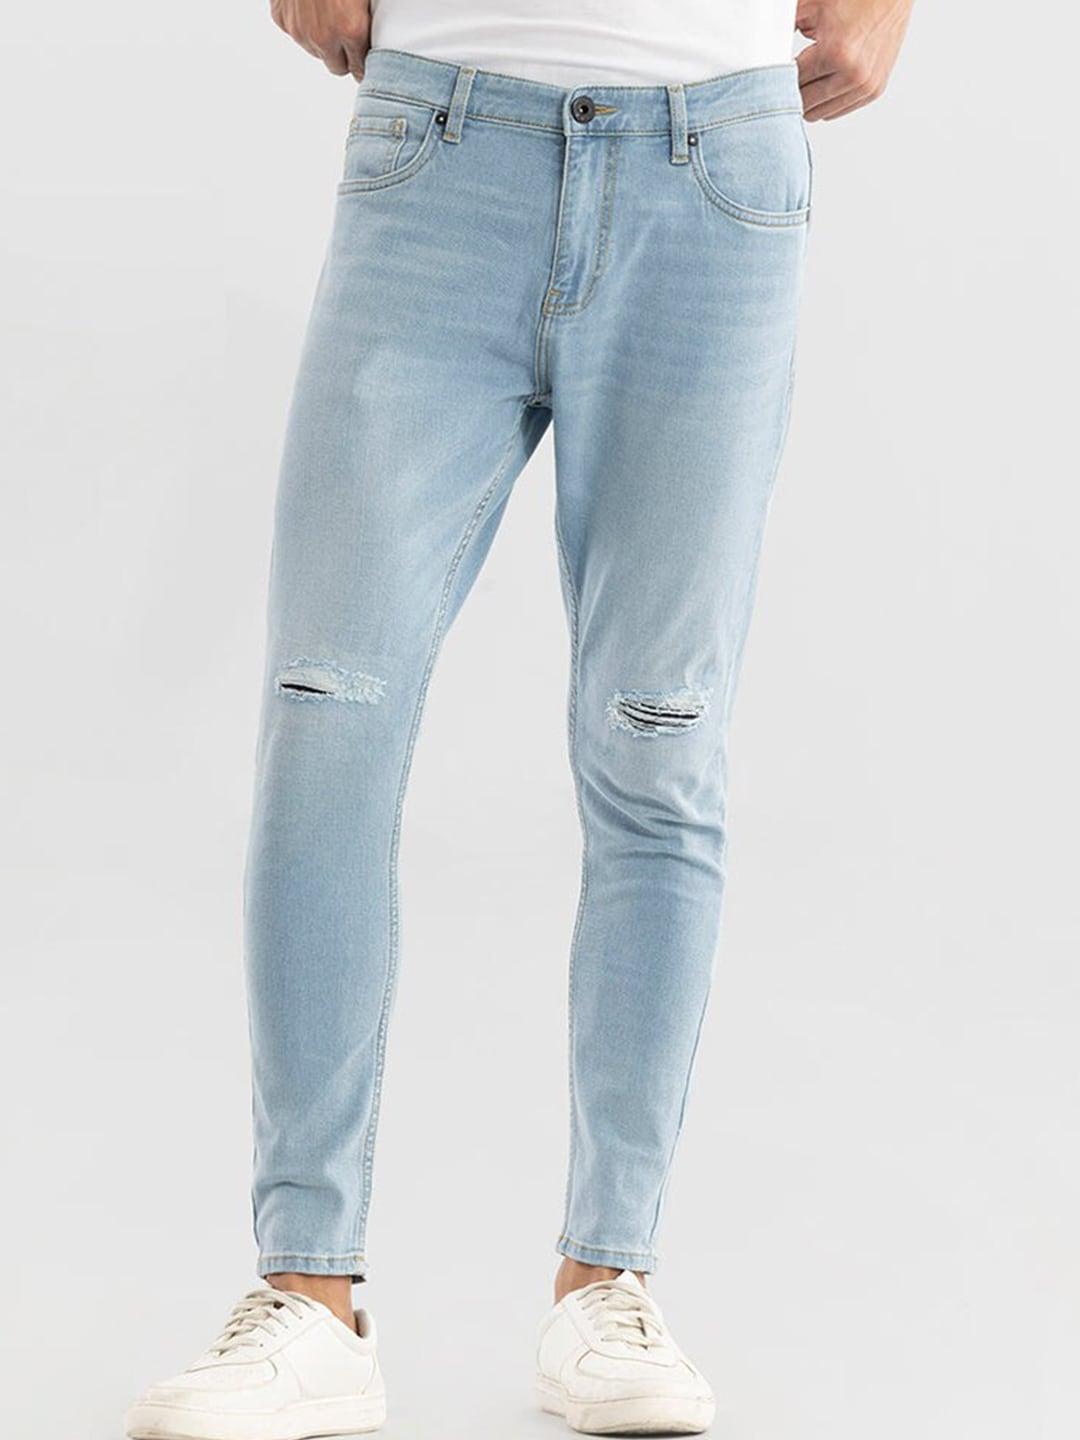 snitch-men-skinny-fit-slash-knee-heavy-fade-stretchable-jeans